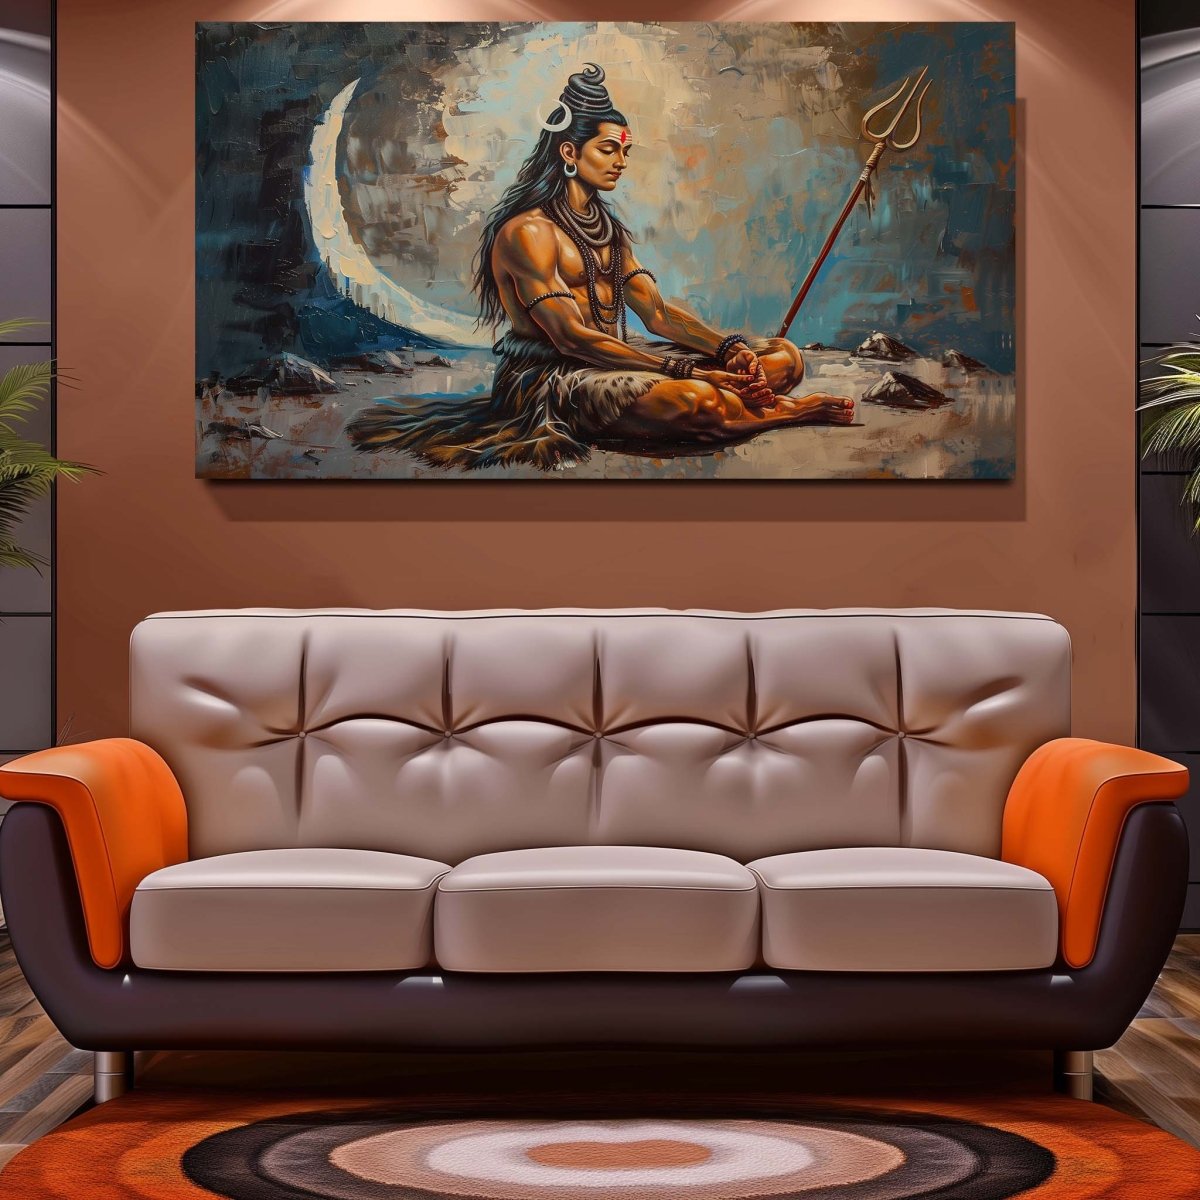 Shiva : Samadhi's Embrace Canvas Wall Painting (36 x 24 Inches)